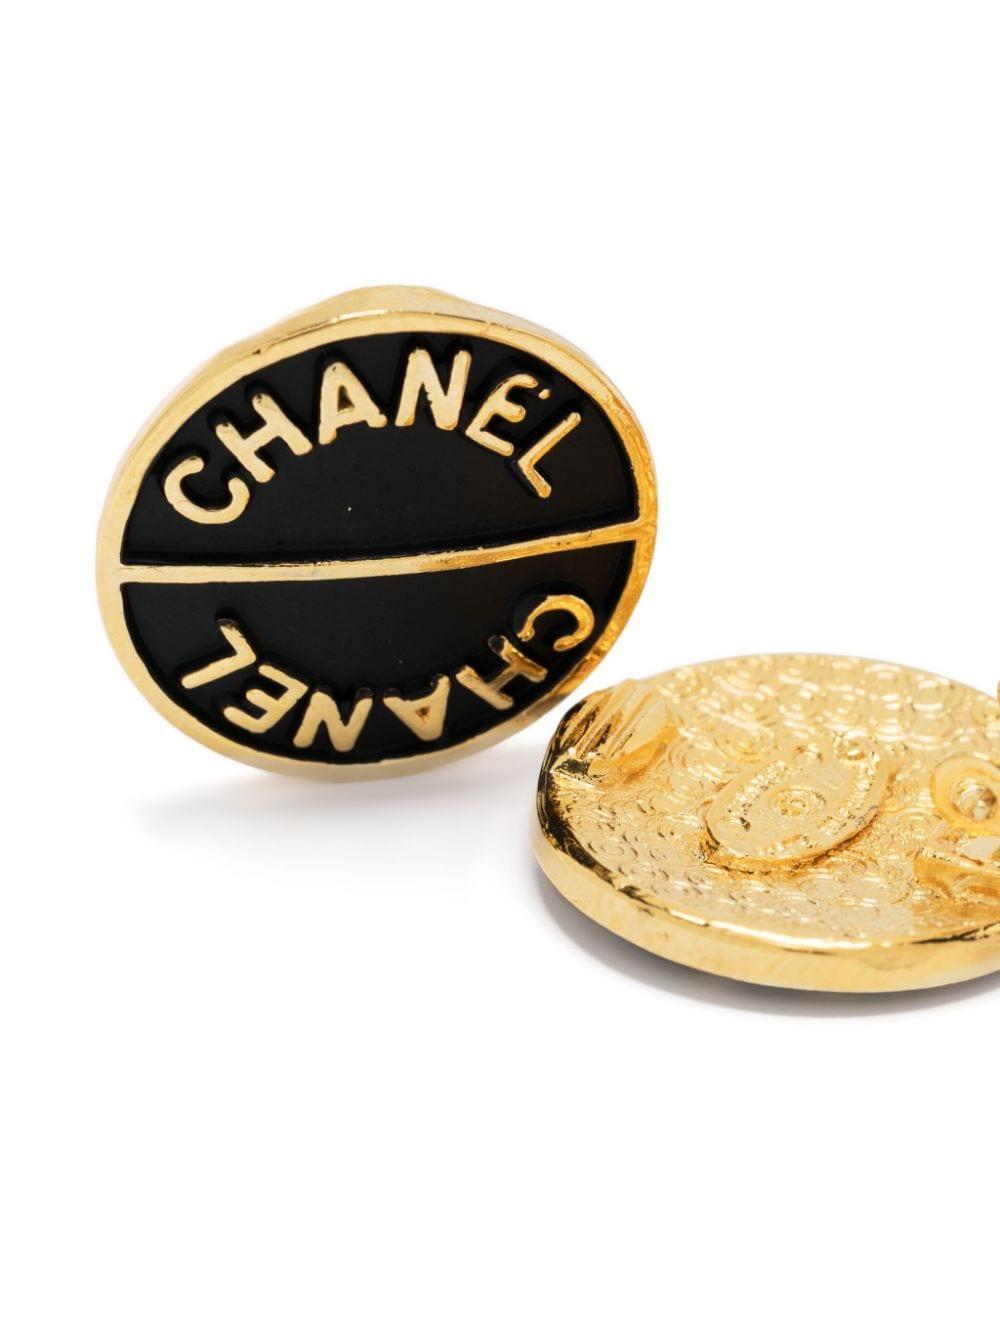 1990s Chanel black logo-embossed clip-on earrings featuring the signature logo, gold-tone outline, embossed logo to the front, a clip-on fastening, back plaque pitted. 
Circa 1990s
These earrings come as a pair.
Diameter: 0.86in (2.2cm) 
In good